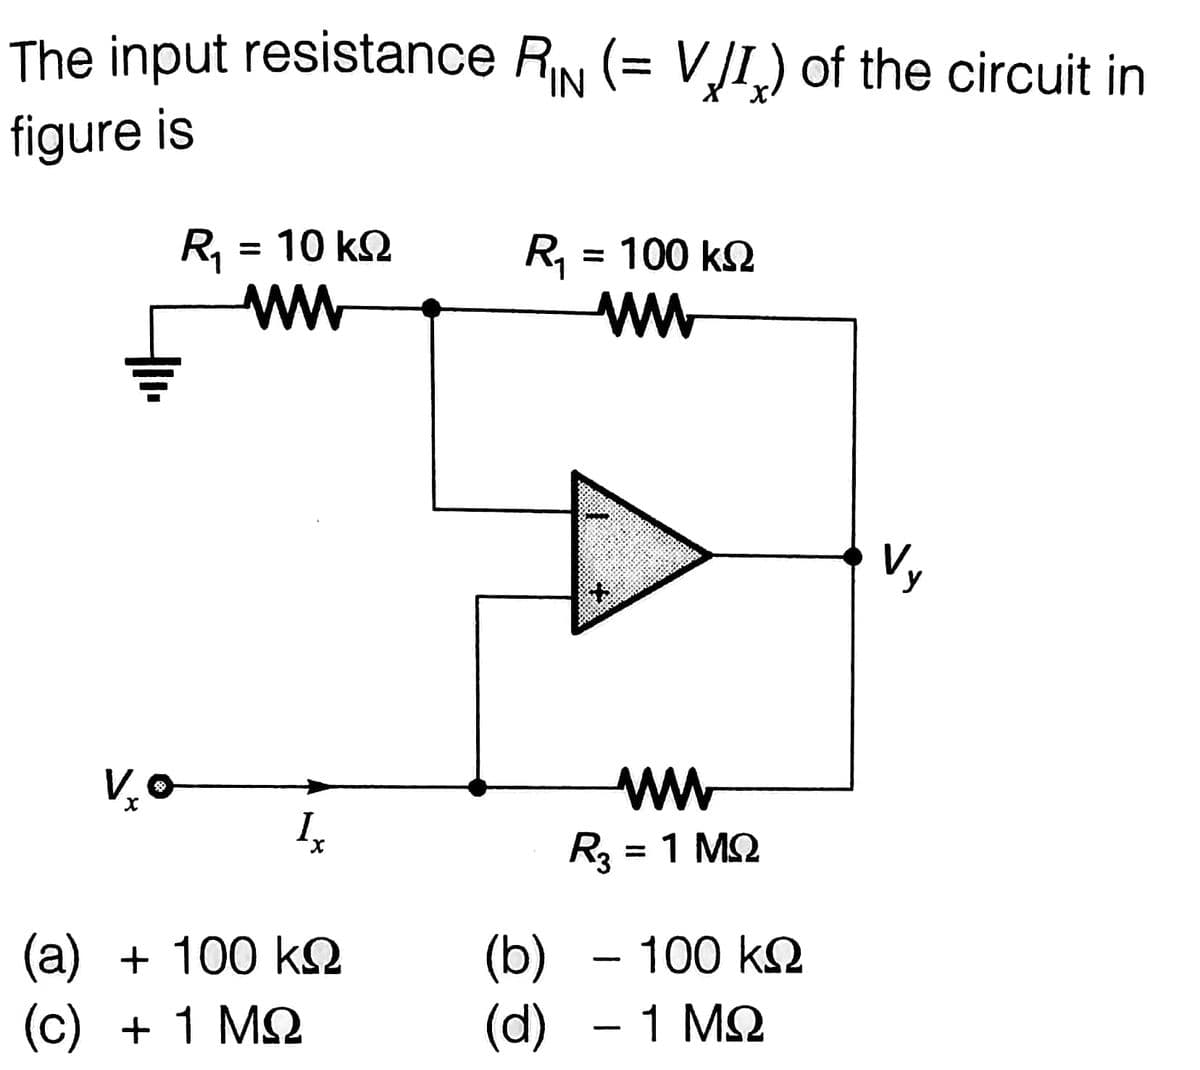 The input resistance RIN (= VJI) of the circuit in
figure is
R, = 10 k2
ww
R = 100 k2
ww
Vy
V,
ww
= 1 M2
(a) + 100 k2
(c) + 1 MQ
(b) – 100 k2
(d) – 1 M2
